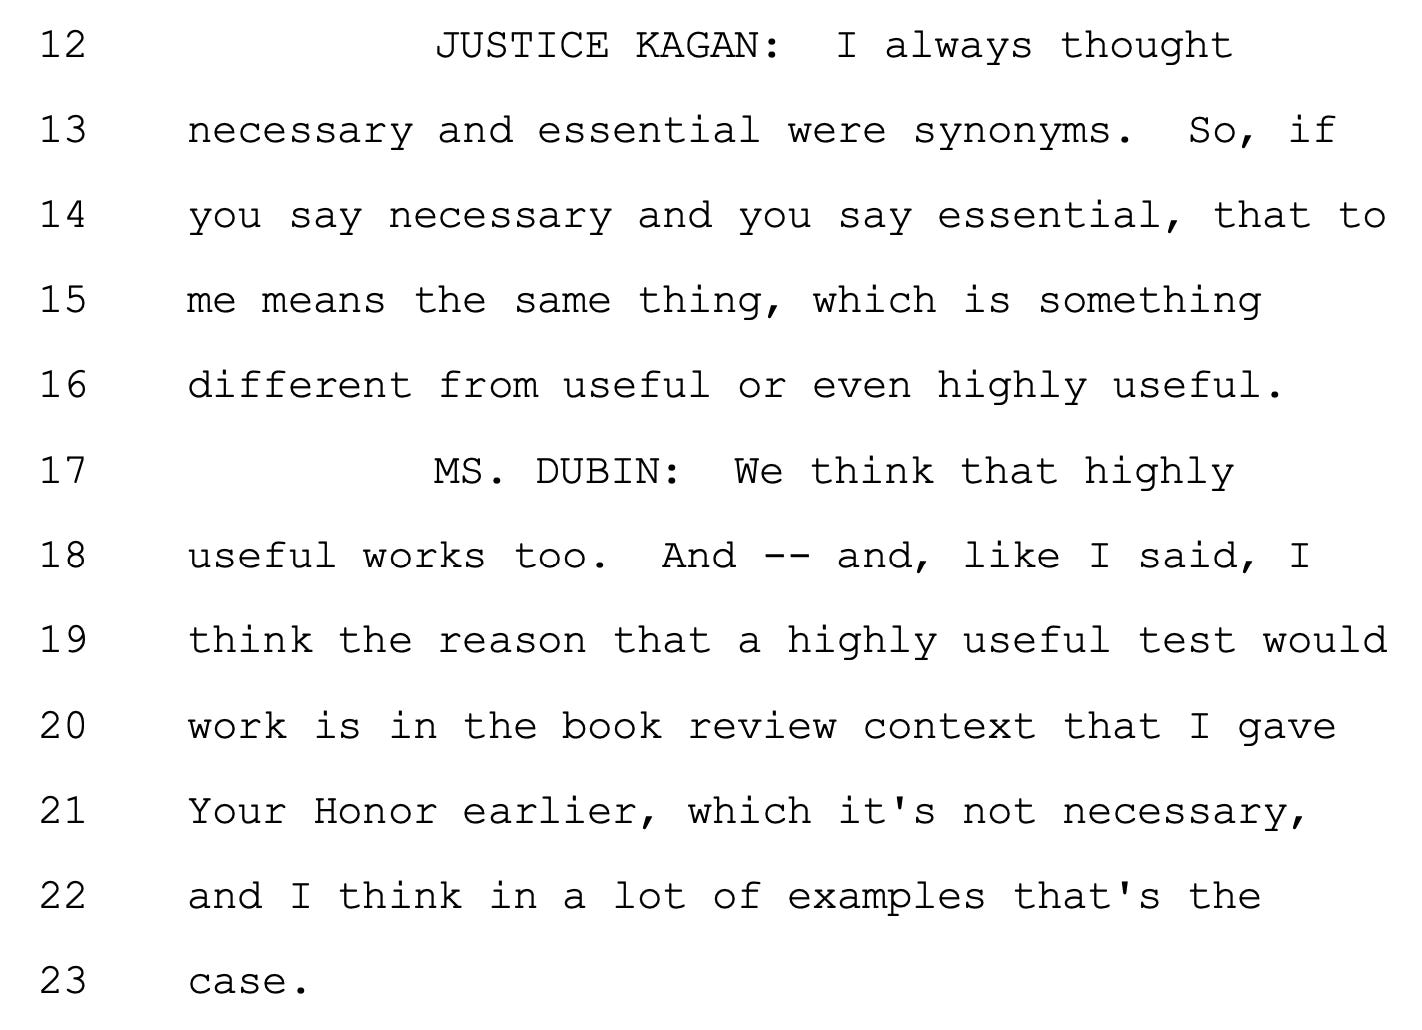 JUSTICE KAGAN: I always thought 13 necessary and essential were synonyms. So, if 14 you say necessary and you say essential, that to 15 me means the same thing, which is something 16 different from useful or even highly useful. 17 MS. DUBIN: We think that highly 18 useful works too. And -- and, like I said, I 19 think the reason that a highly useful test would 20 work is in the book review context that I gave 21 Your Honor earlier, which it's not necessary, 22 and I think in a lot of examples that's the 23 case.